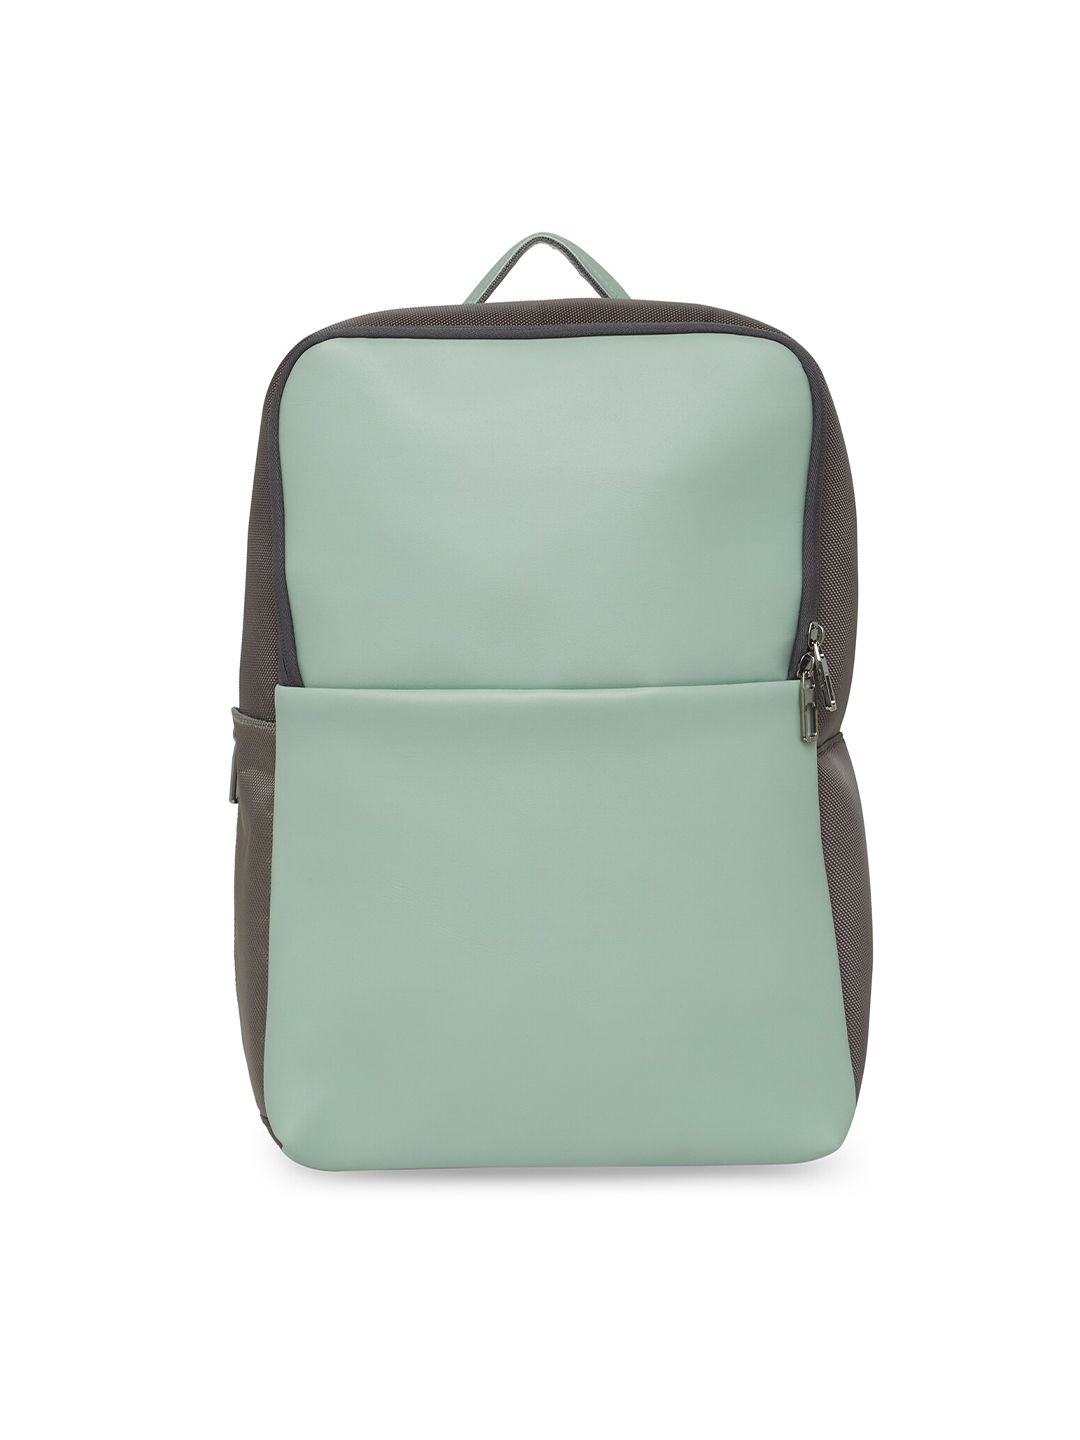 MBOSS Unisex Sea Green & Grey Colourblocked Backpack Price in India